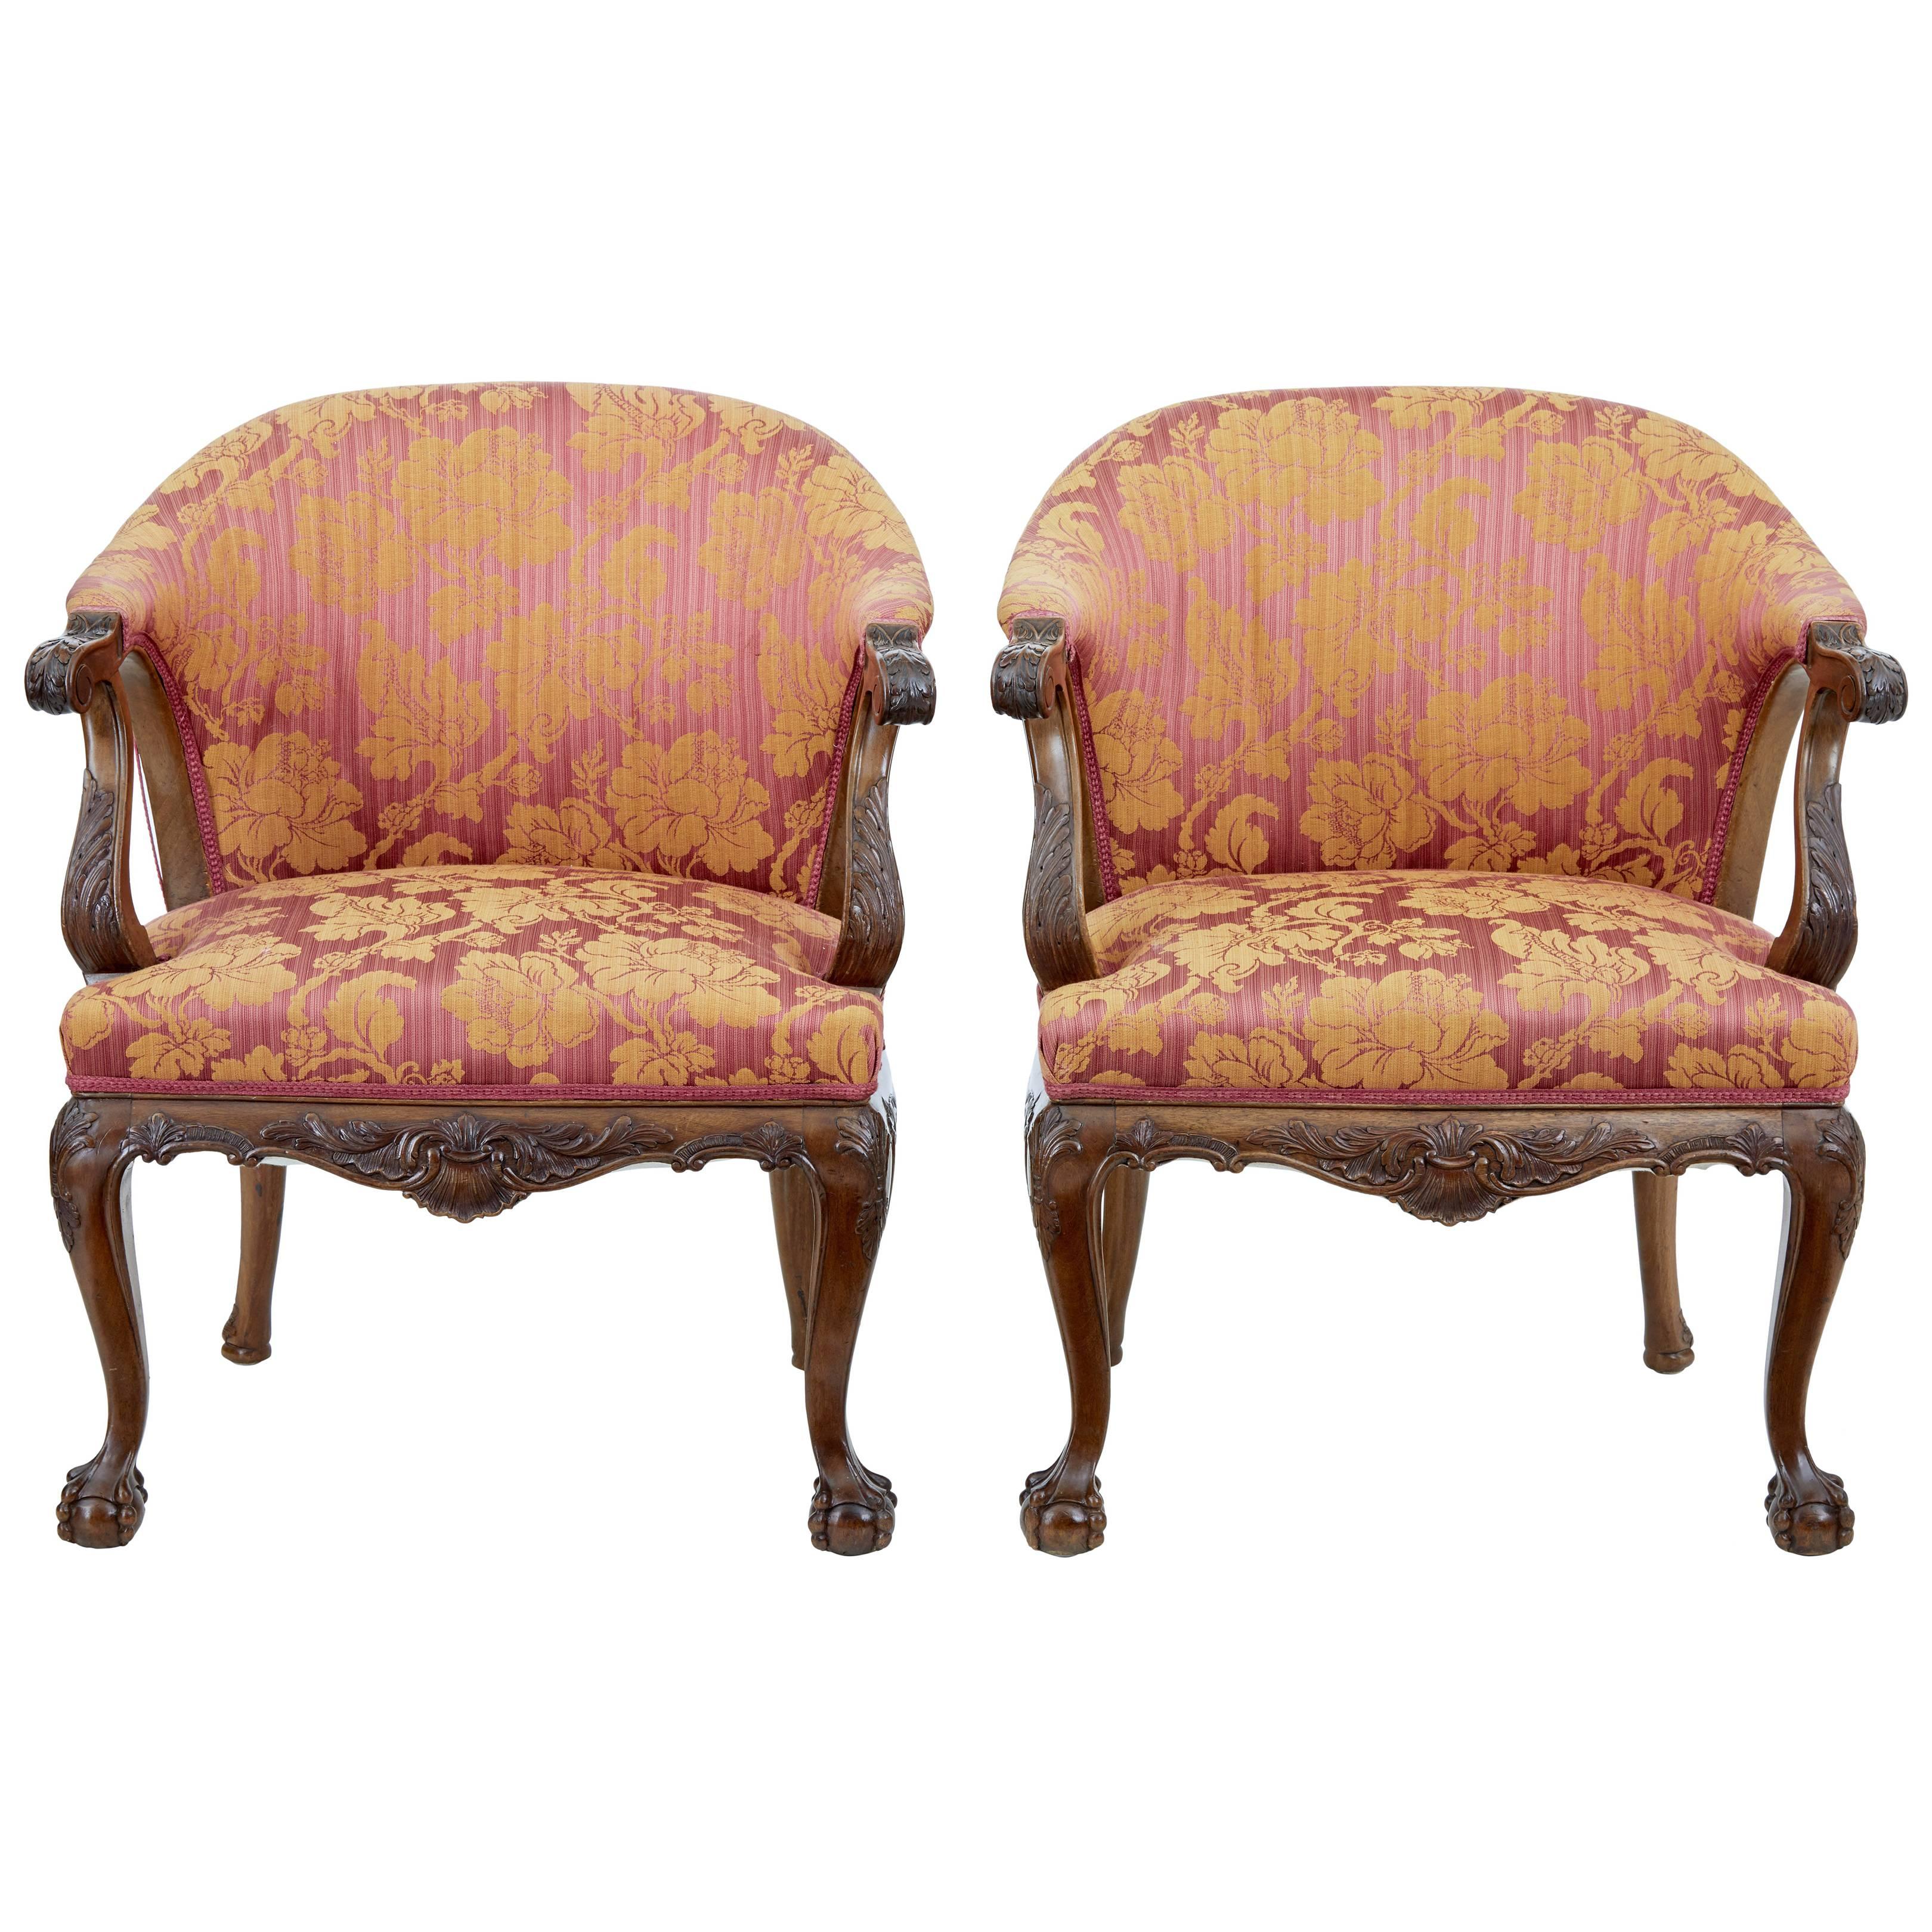 Pair of Early 20th Century Carved Walnut Club Chairs